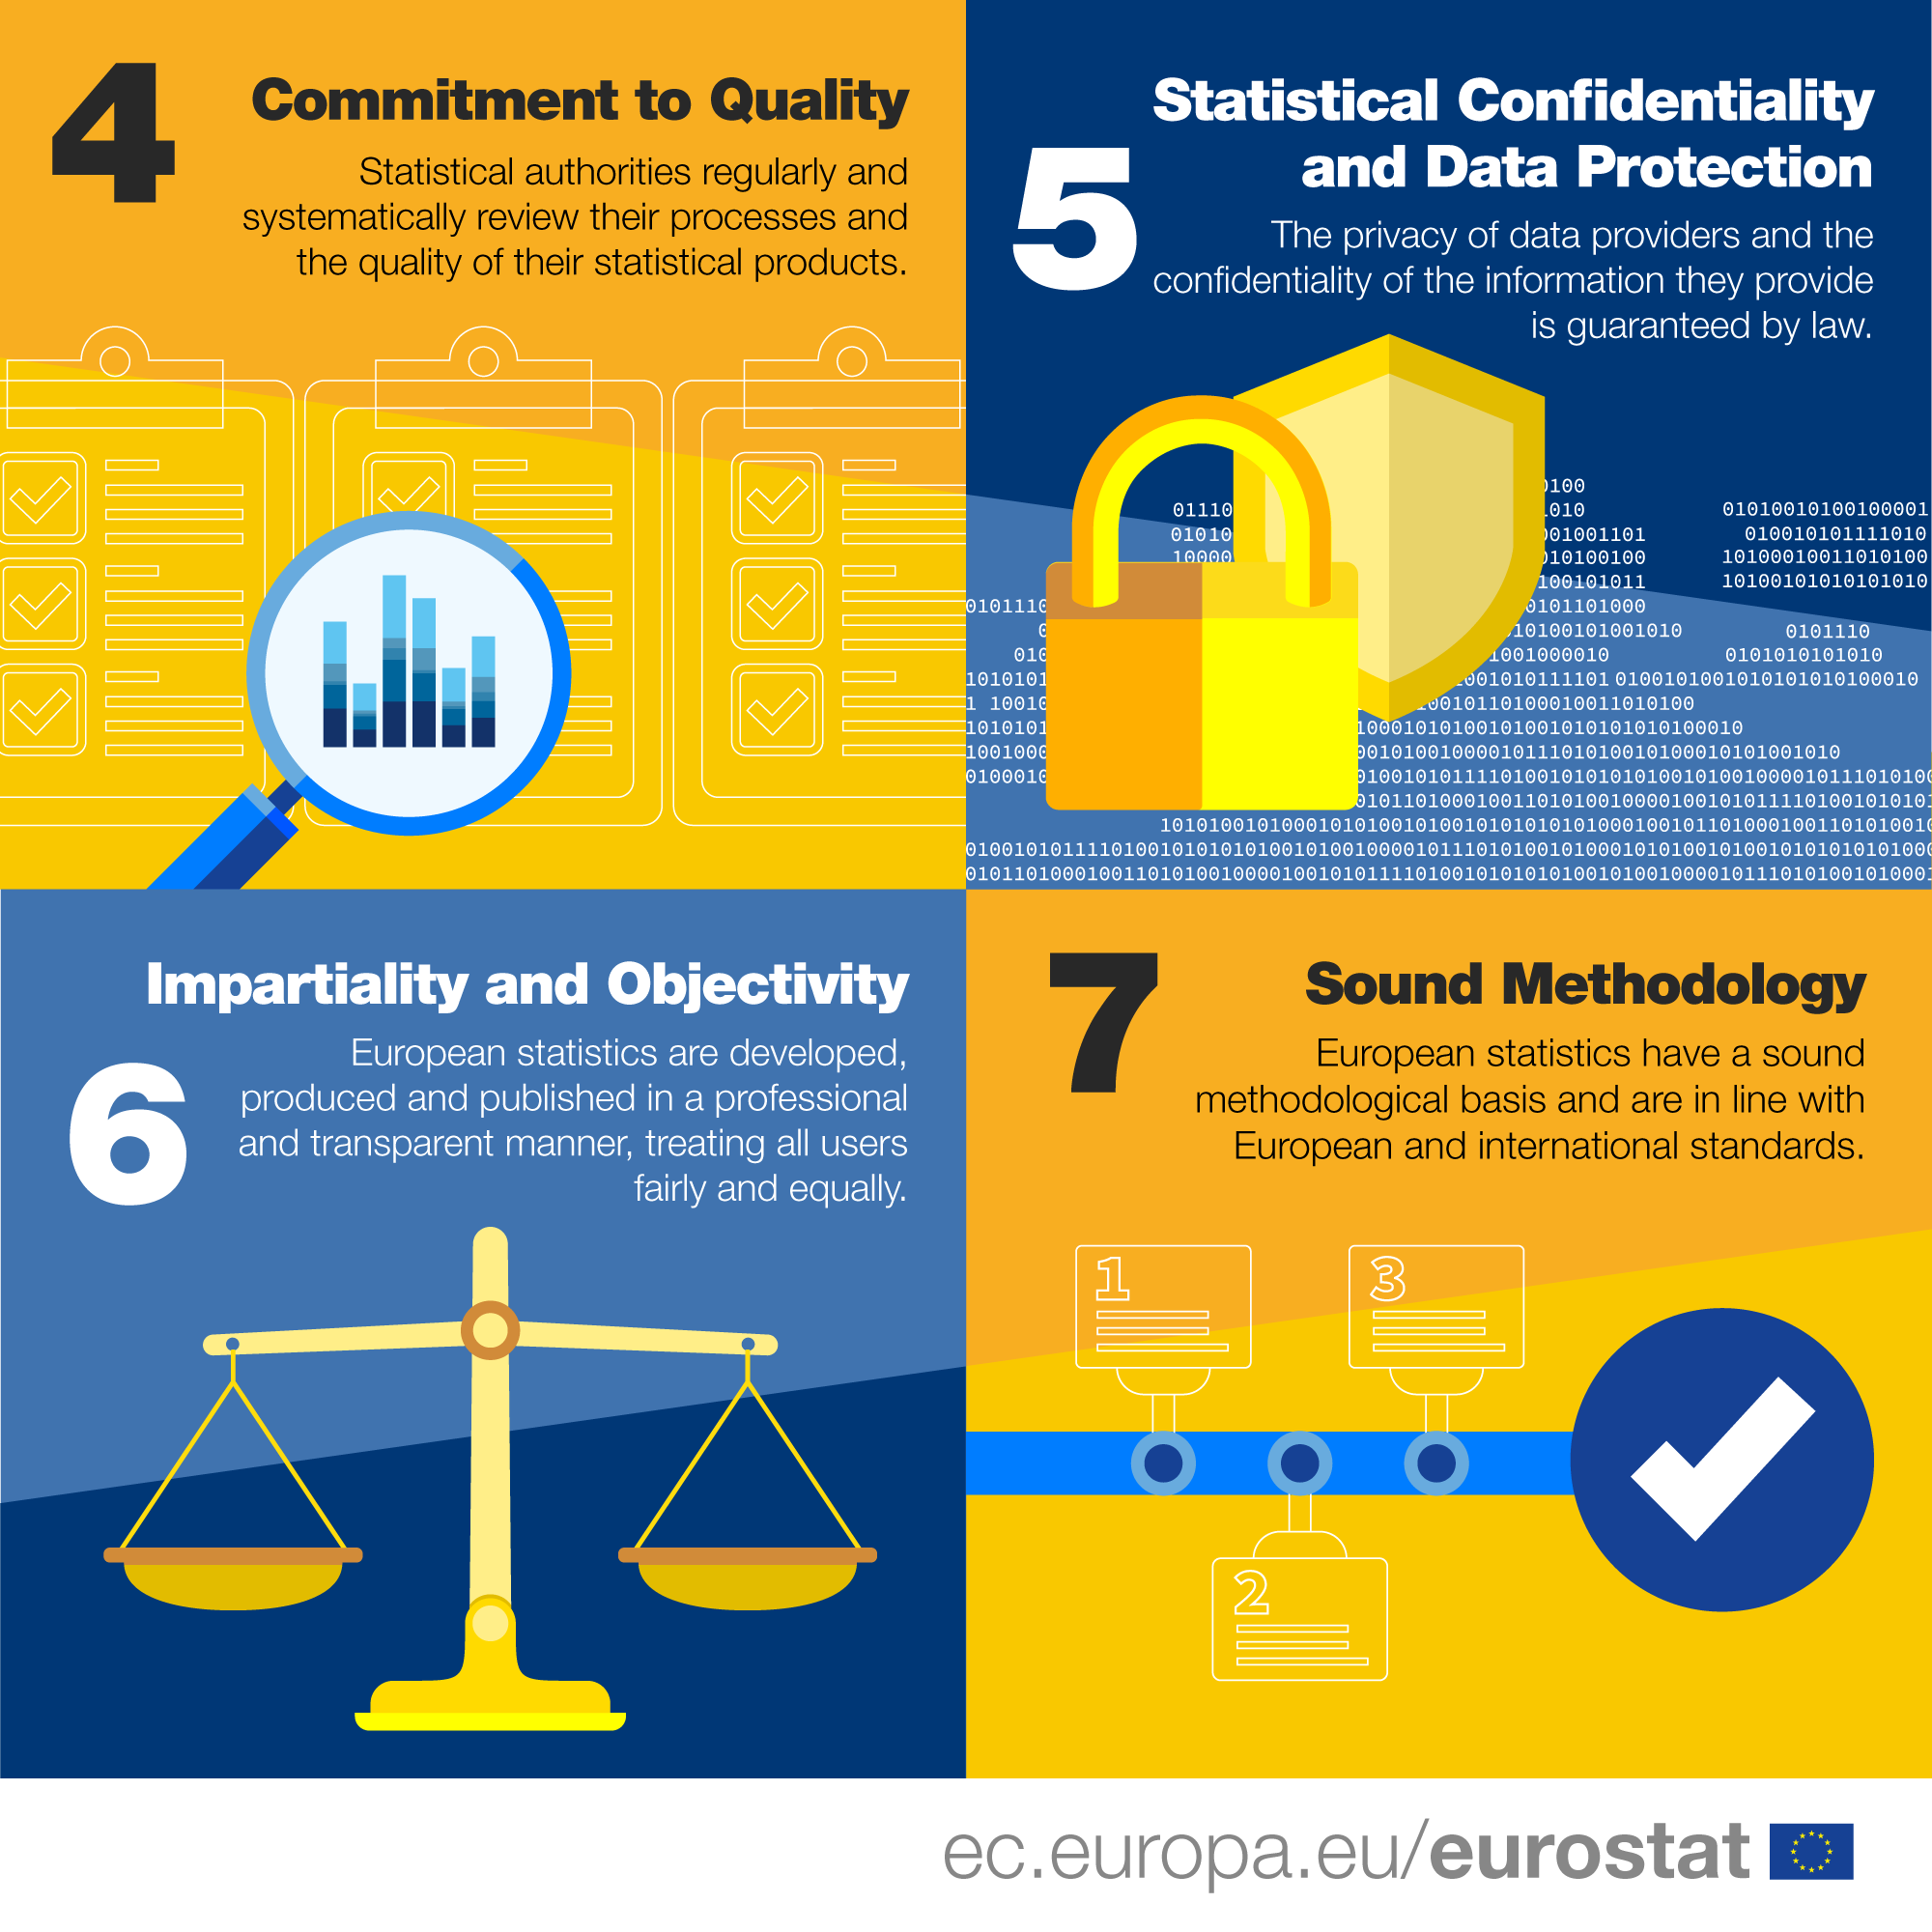 Infographic Code of Practice: 4 Commitment to Quality Statistical authorities regularly and systematically review their processes and the quality of their statistical products. 5 Statistical Confidentiality and Data Protection The privacy of data providers and the confidentiality of the information they provide is guaranteed by law. 6 Impartiality and Objectivity European statistics are developed, produced and published in a professional and transparent manner, treating all users fairly and equally. 7 Sound Methodology European statistics have a sound methodological basis and are in line with European and international standards.